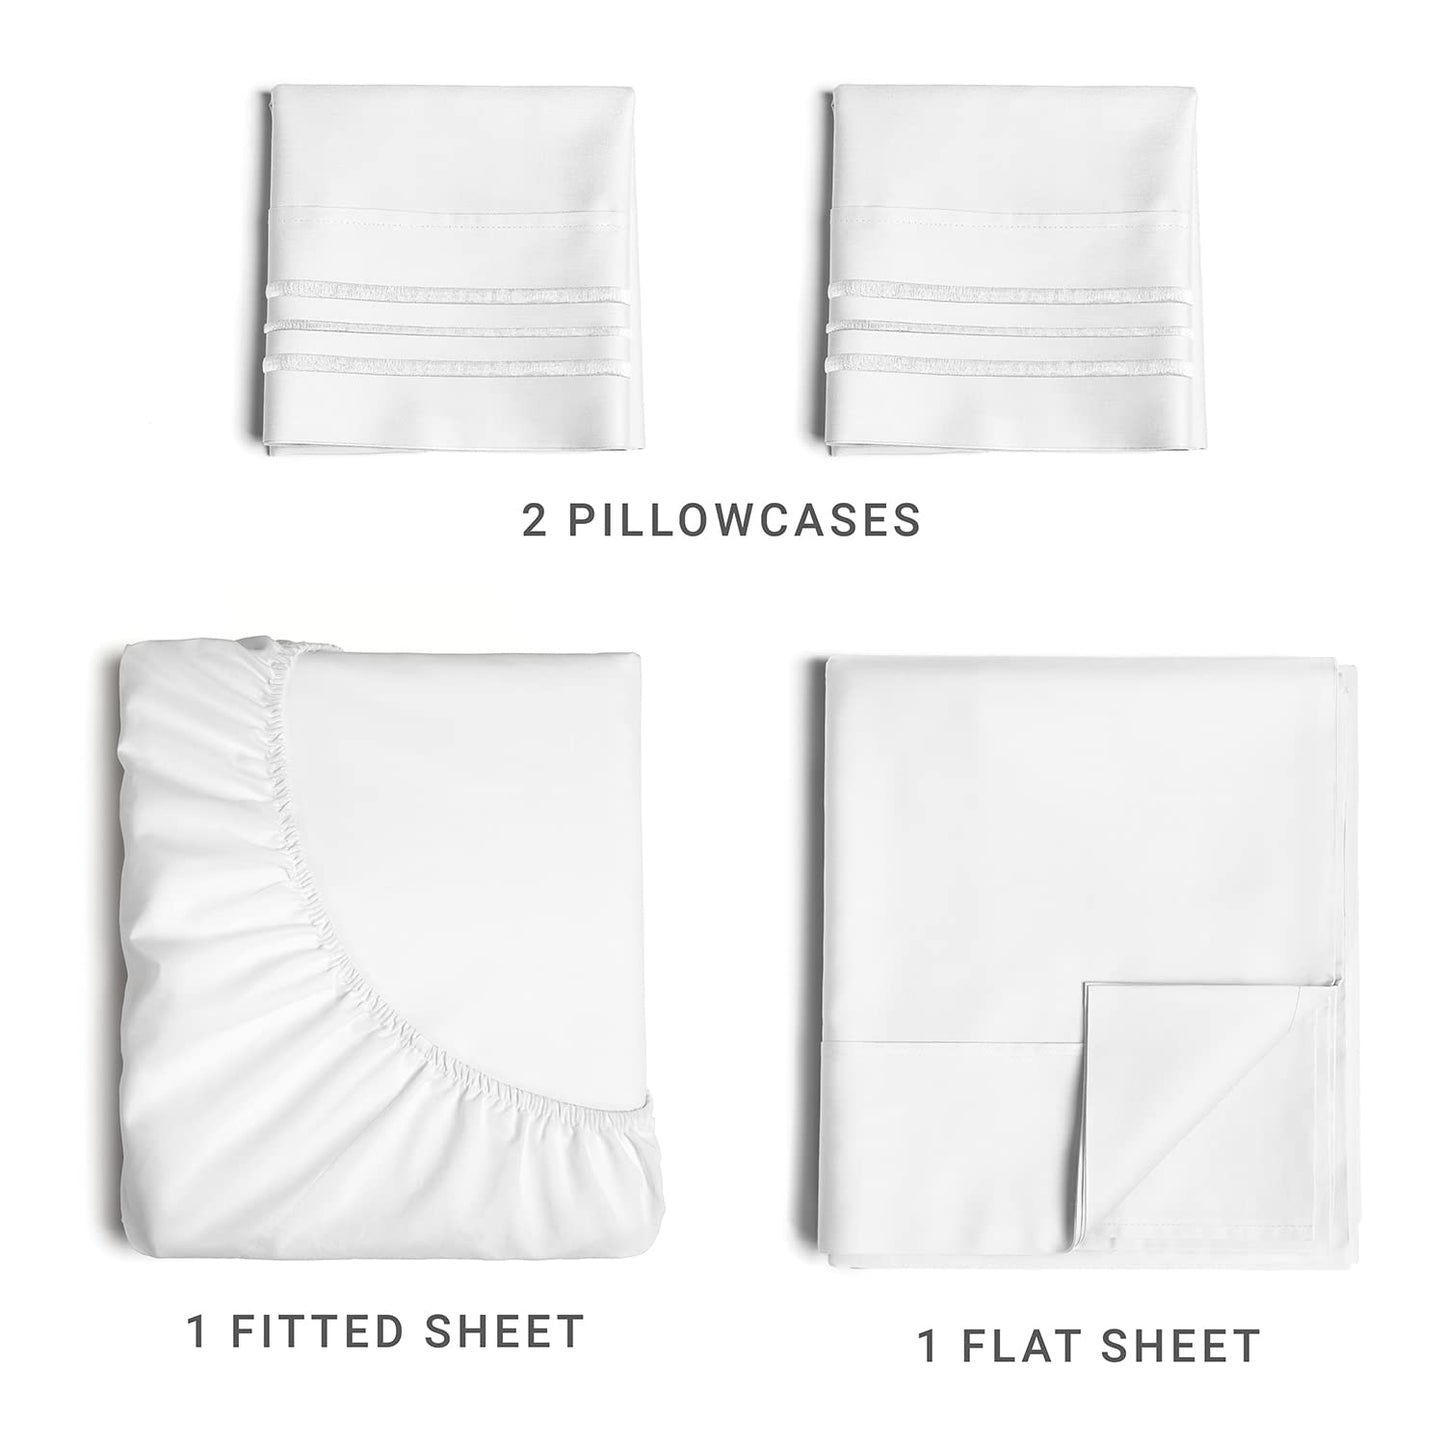 Full Size 4 Piece Sheet Set - Comfy Breathable & Cooling Sheets - Hotel Luxury Bed Sheets for Women & Men - Deep Pockets, Easy-Fit, Extra Soft & Wrinkle Free Sheets - White Oeko-Tex Bed Sheet Set